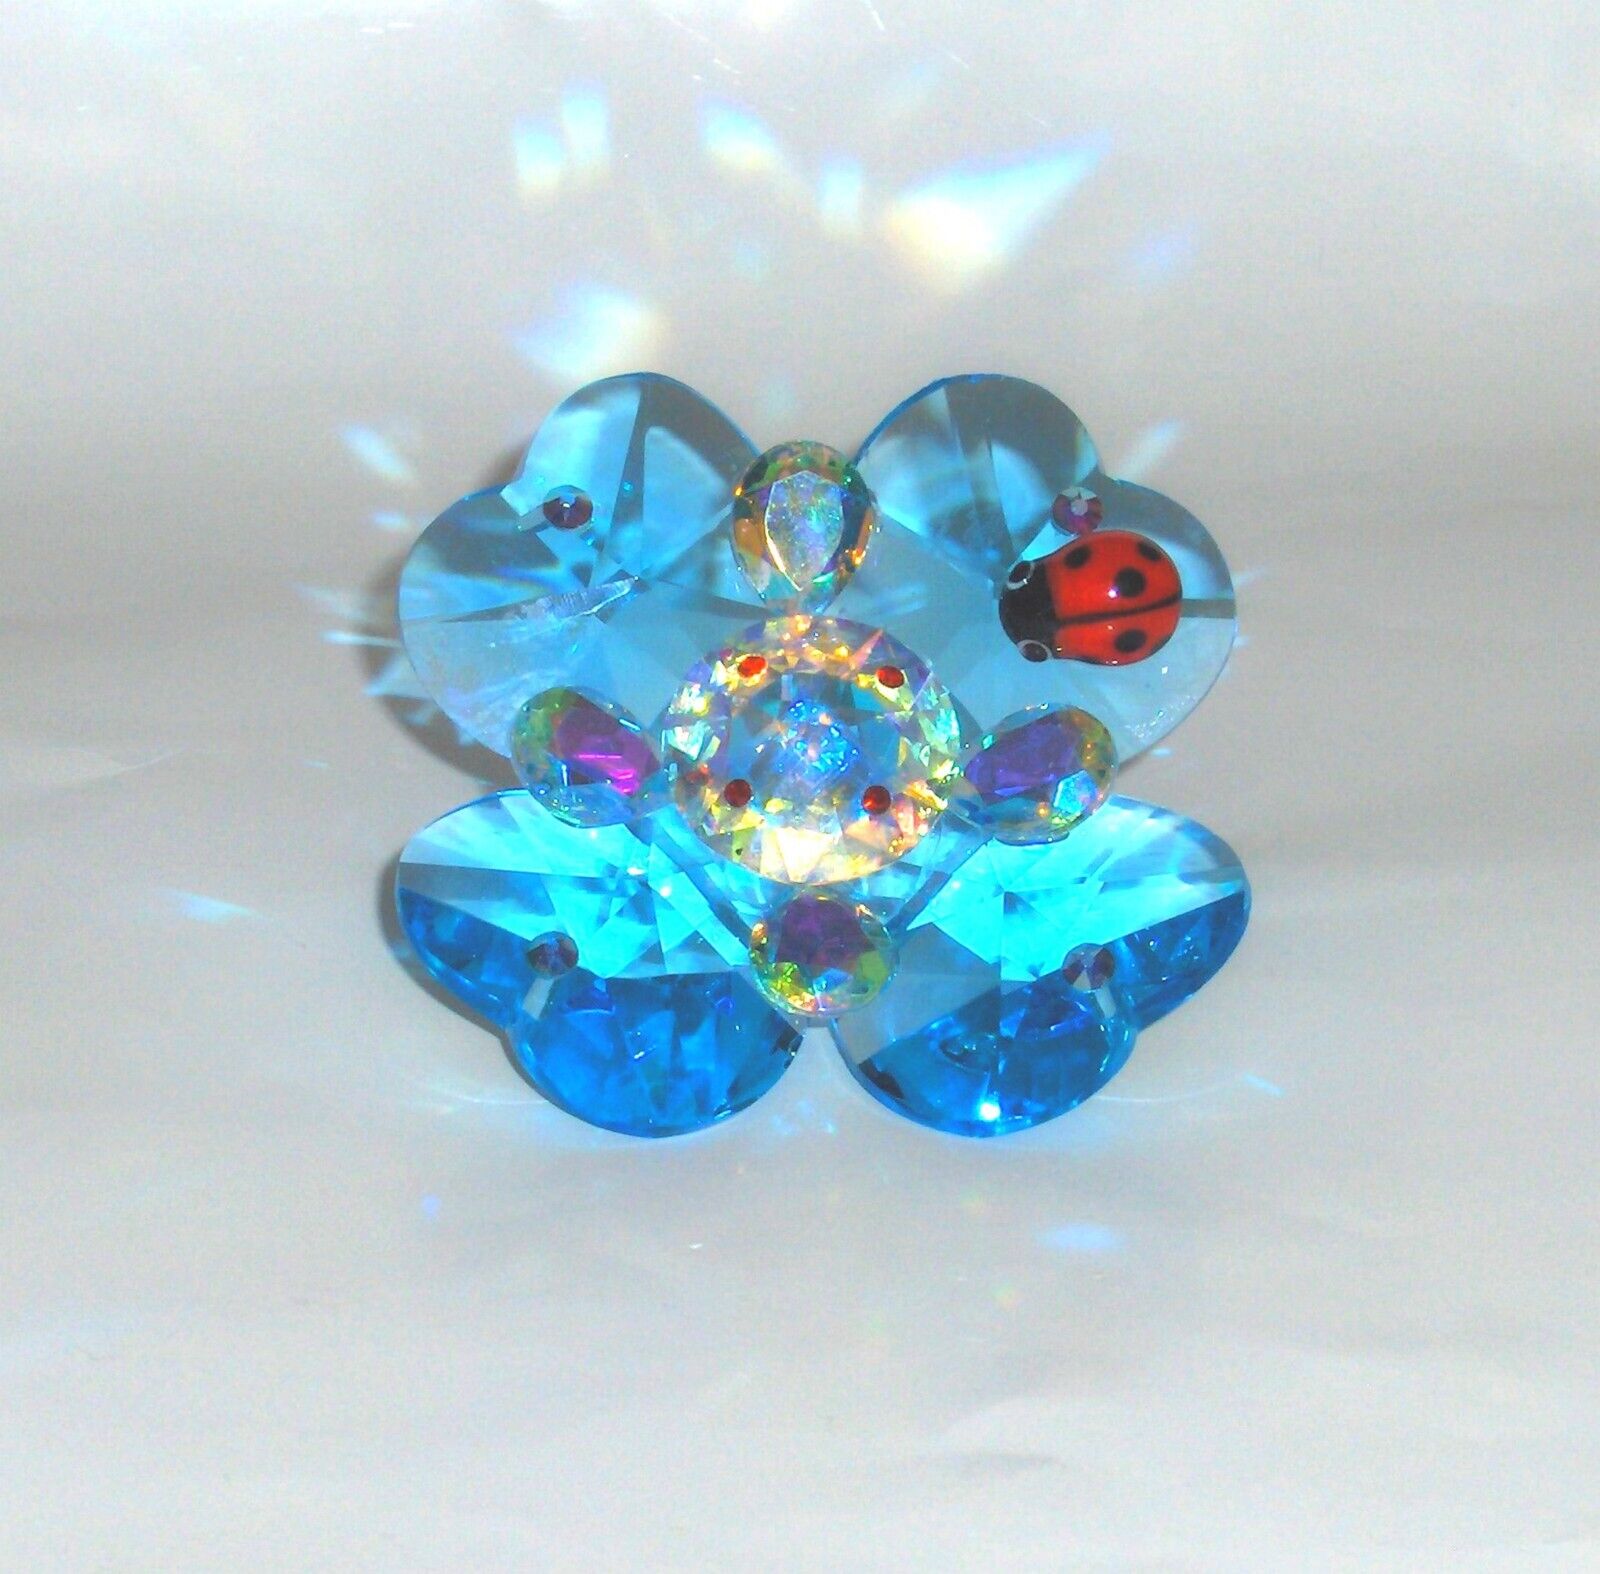 Austrian Crystal Flower with Ladybug on it - Collectible figurine